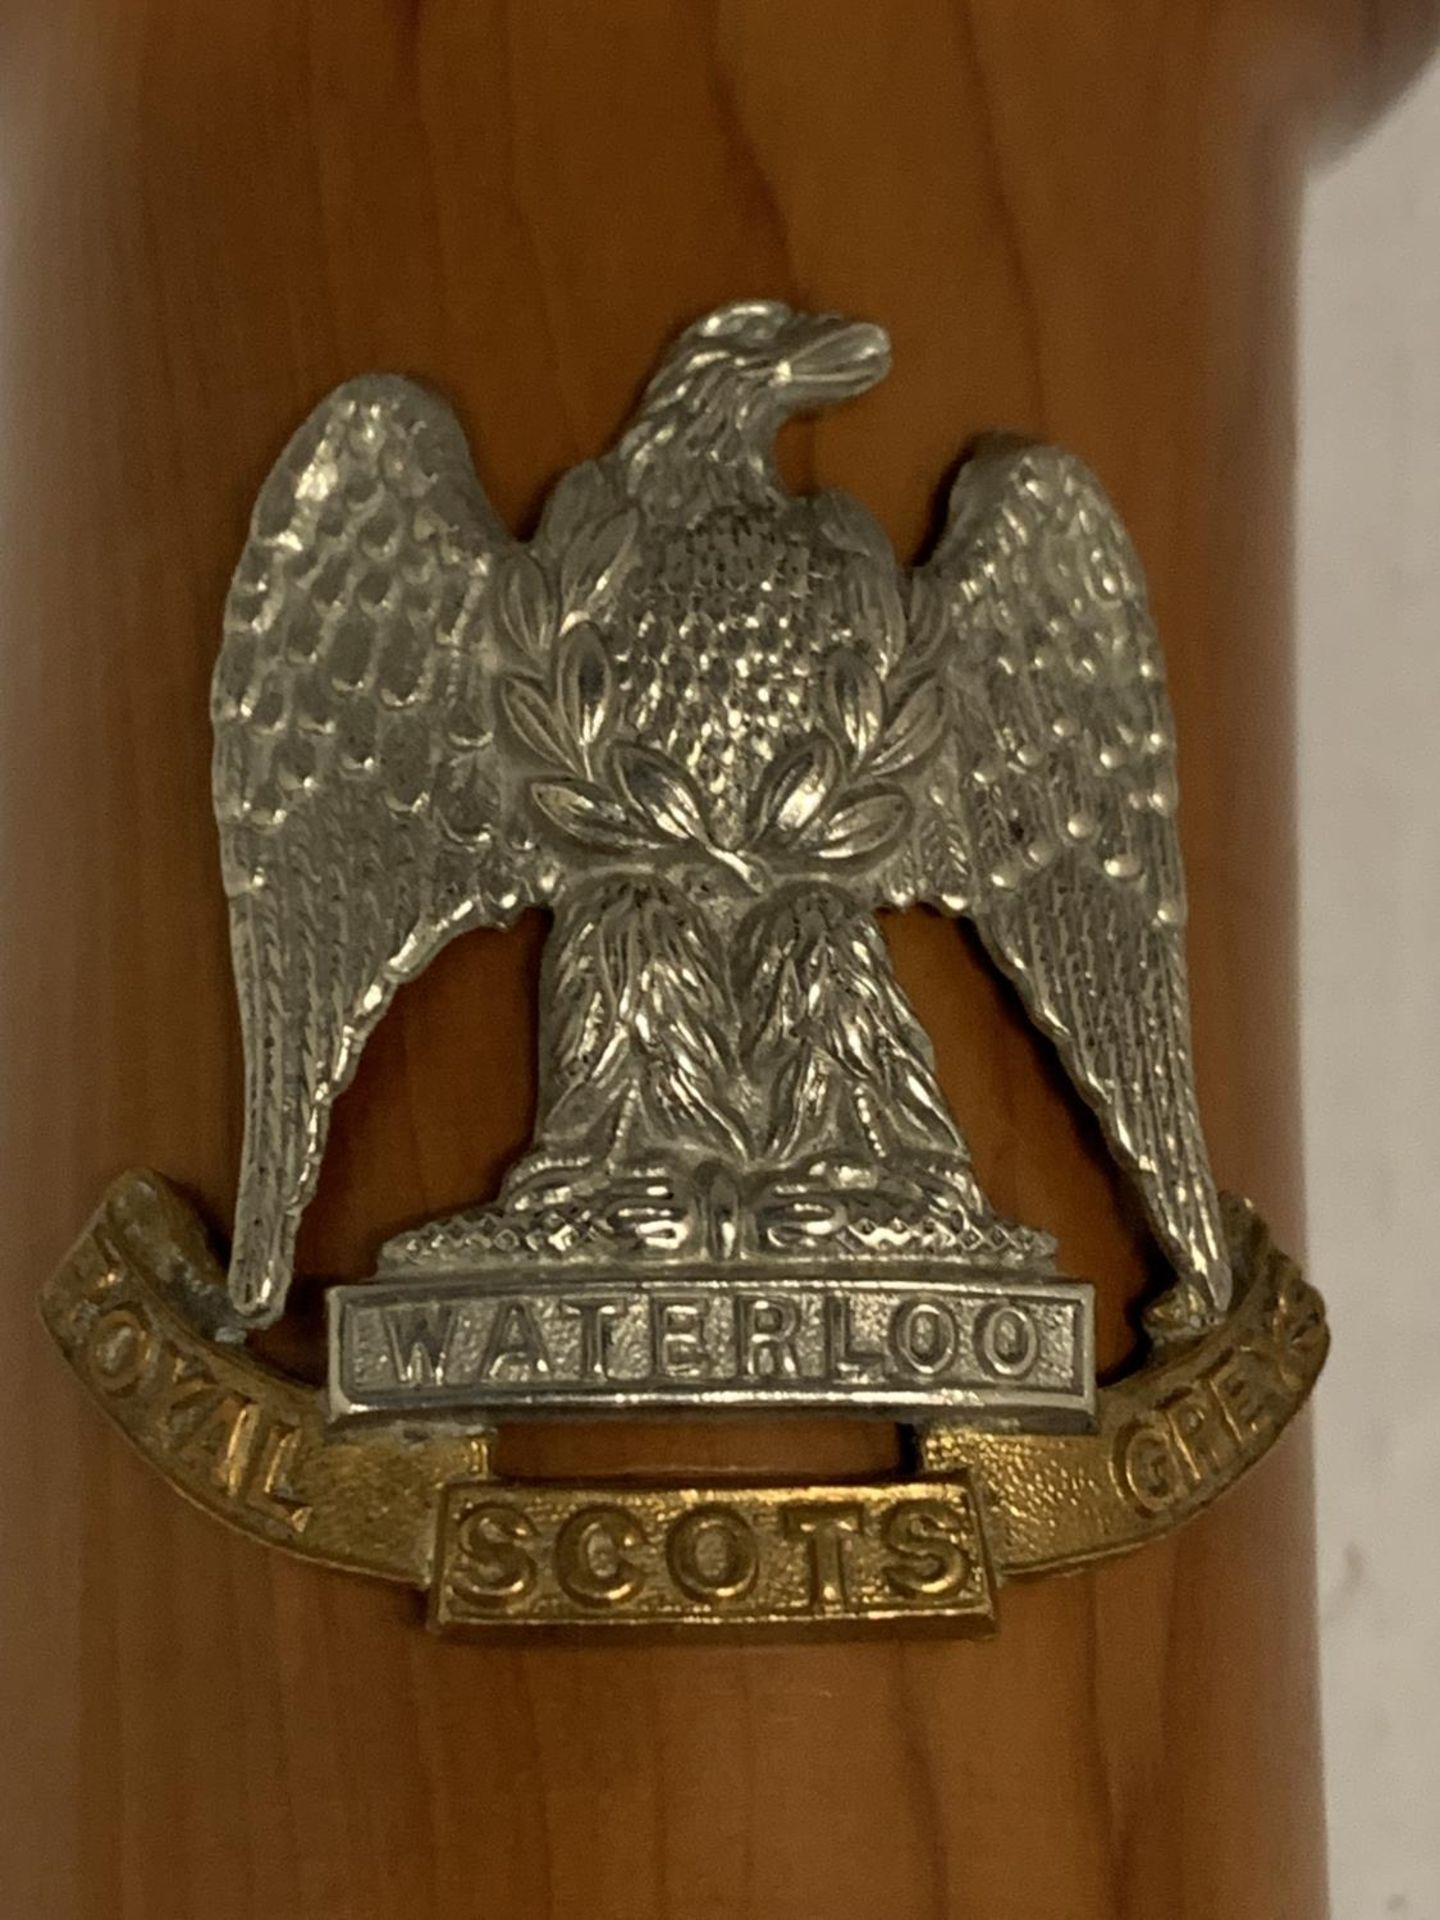 A WOODEN VASE WITH A ROYAL SCOTS GREYS WATERLOO BADGE WITH EAGLE EMBLEM - Image 3 of 3